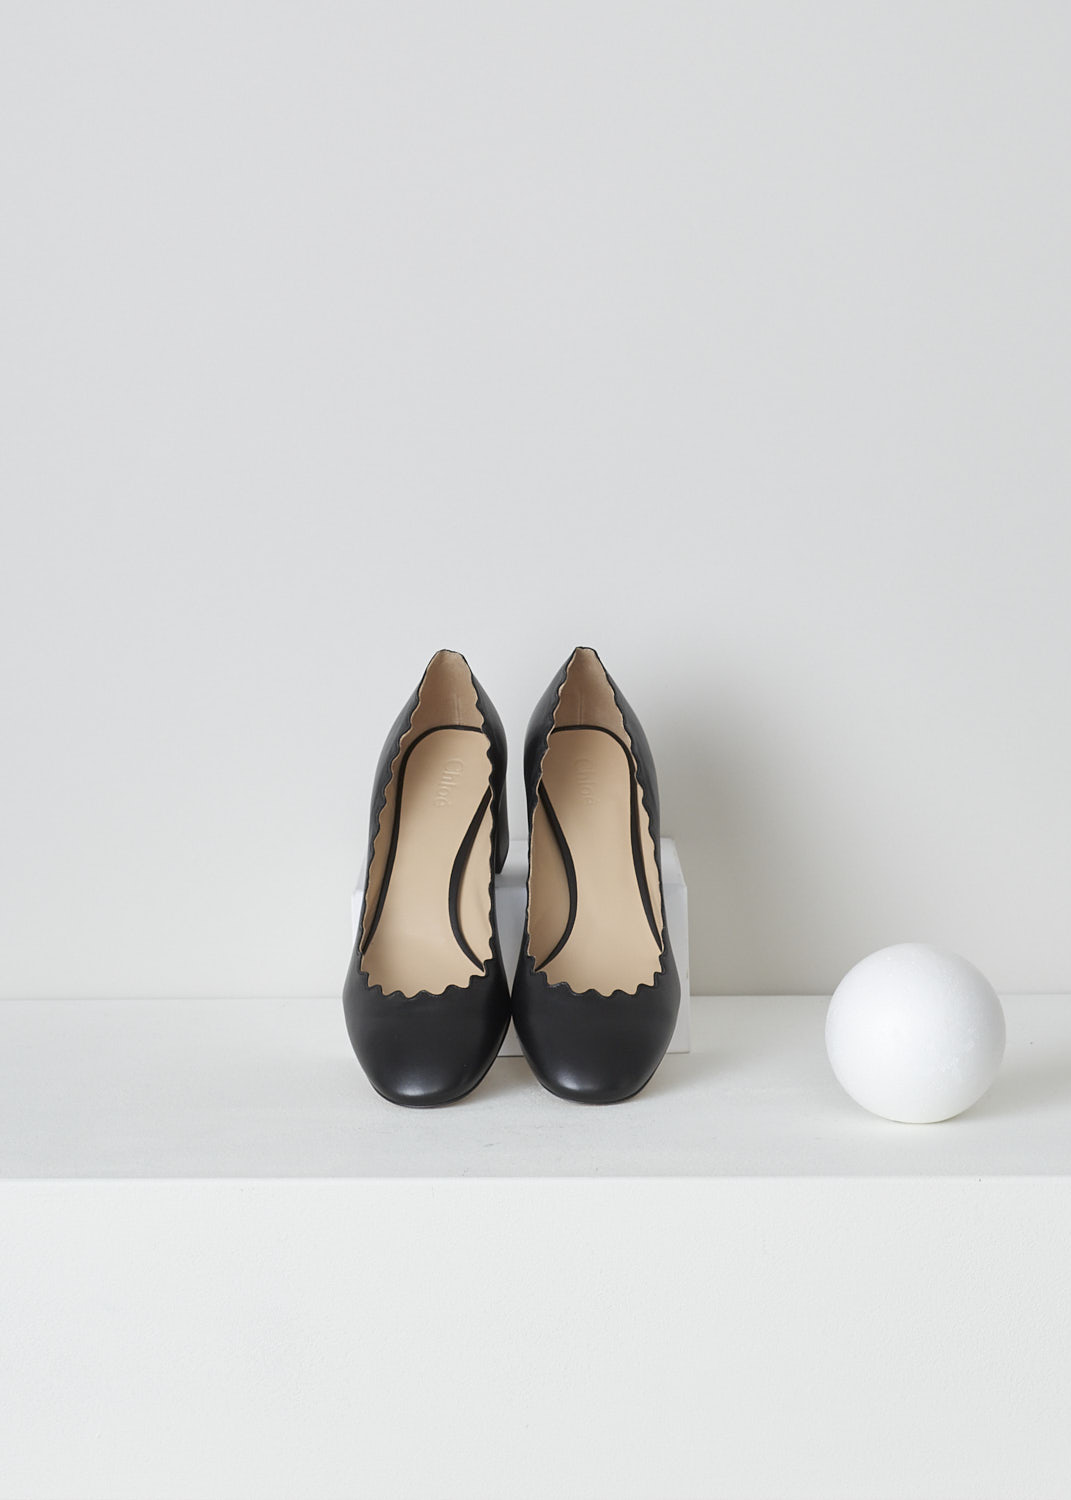 CHLOÃ‰, SCALLOPED LAUREN PUMPS IN BLACK, CHC16A23075001_BLACK, Black, Top, Black leather pumps featuring a sturdy block heel, round toe vamp and a scalloped top-line. 

